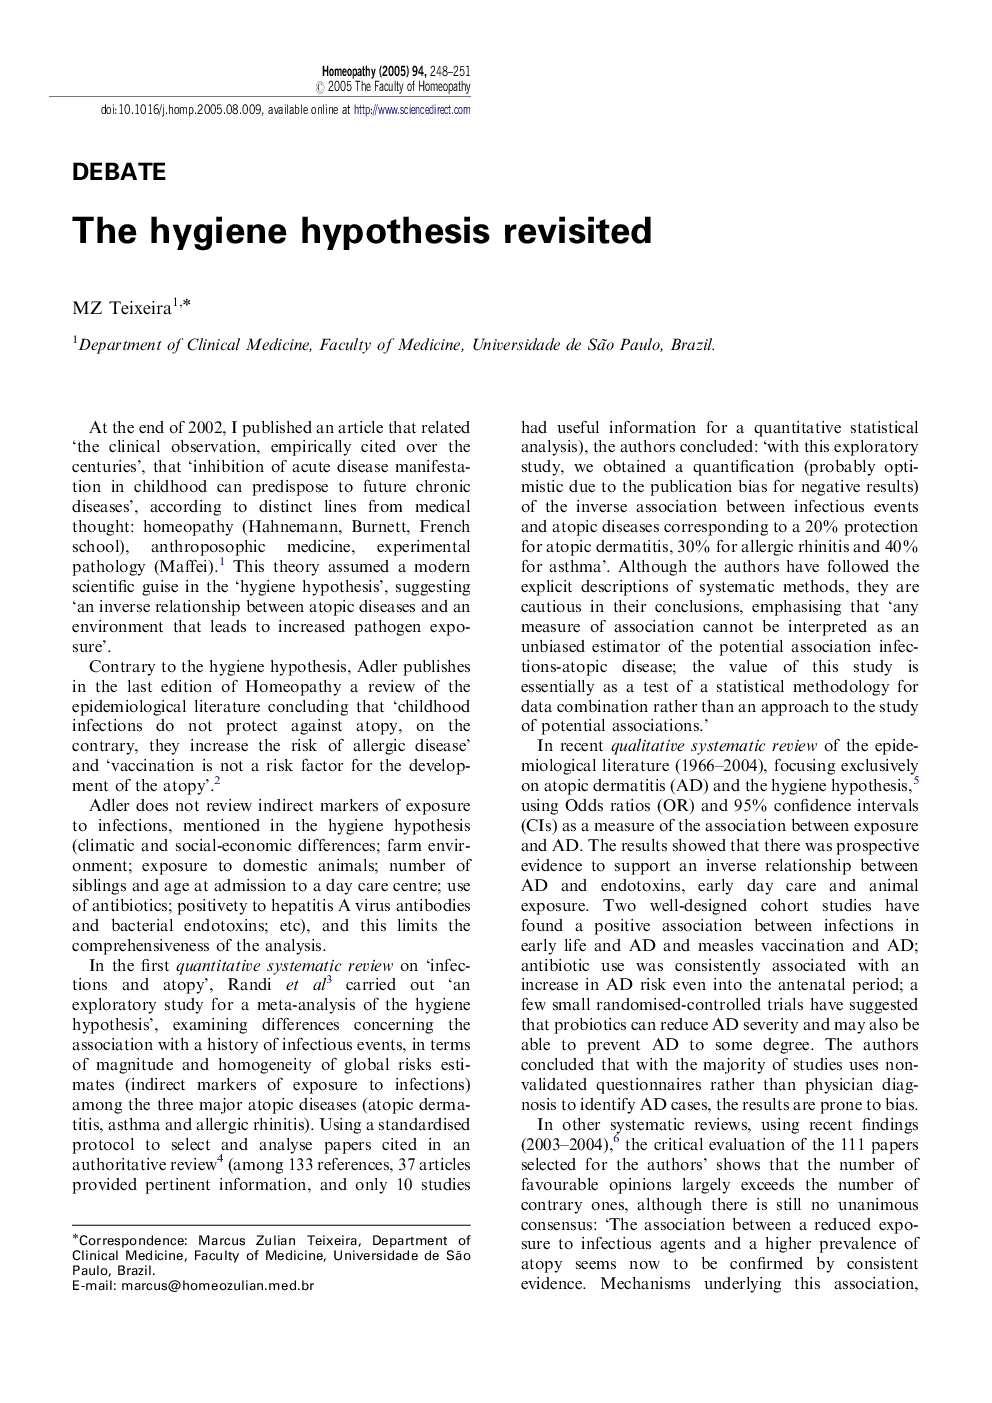 The hygiene hypothesis revisited